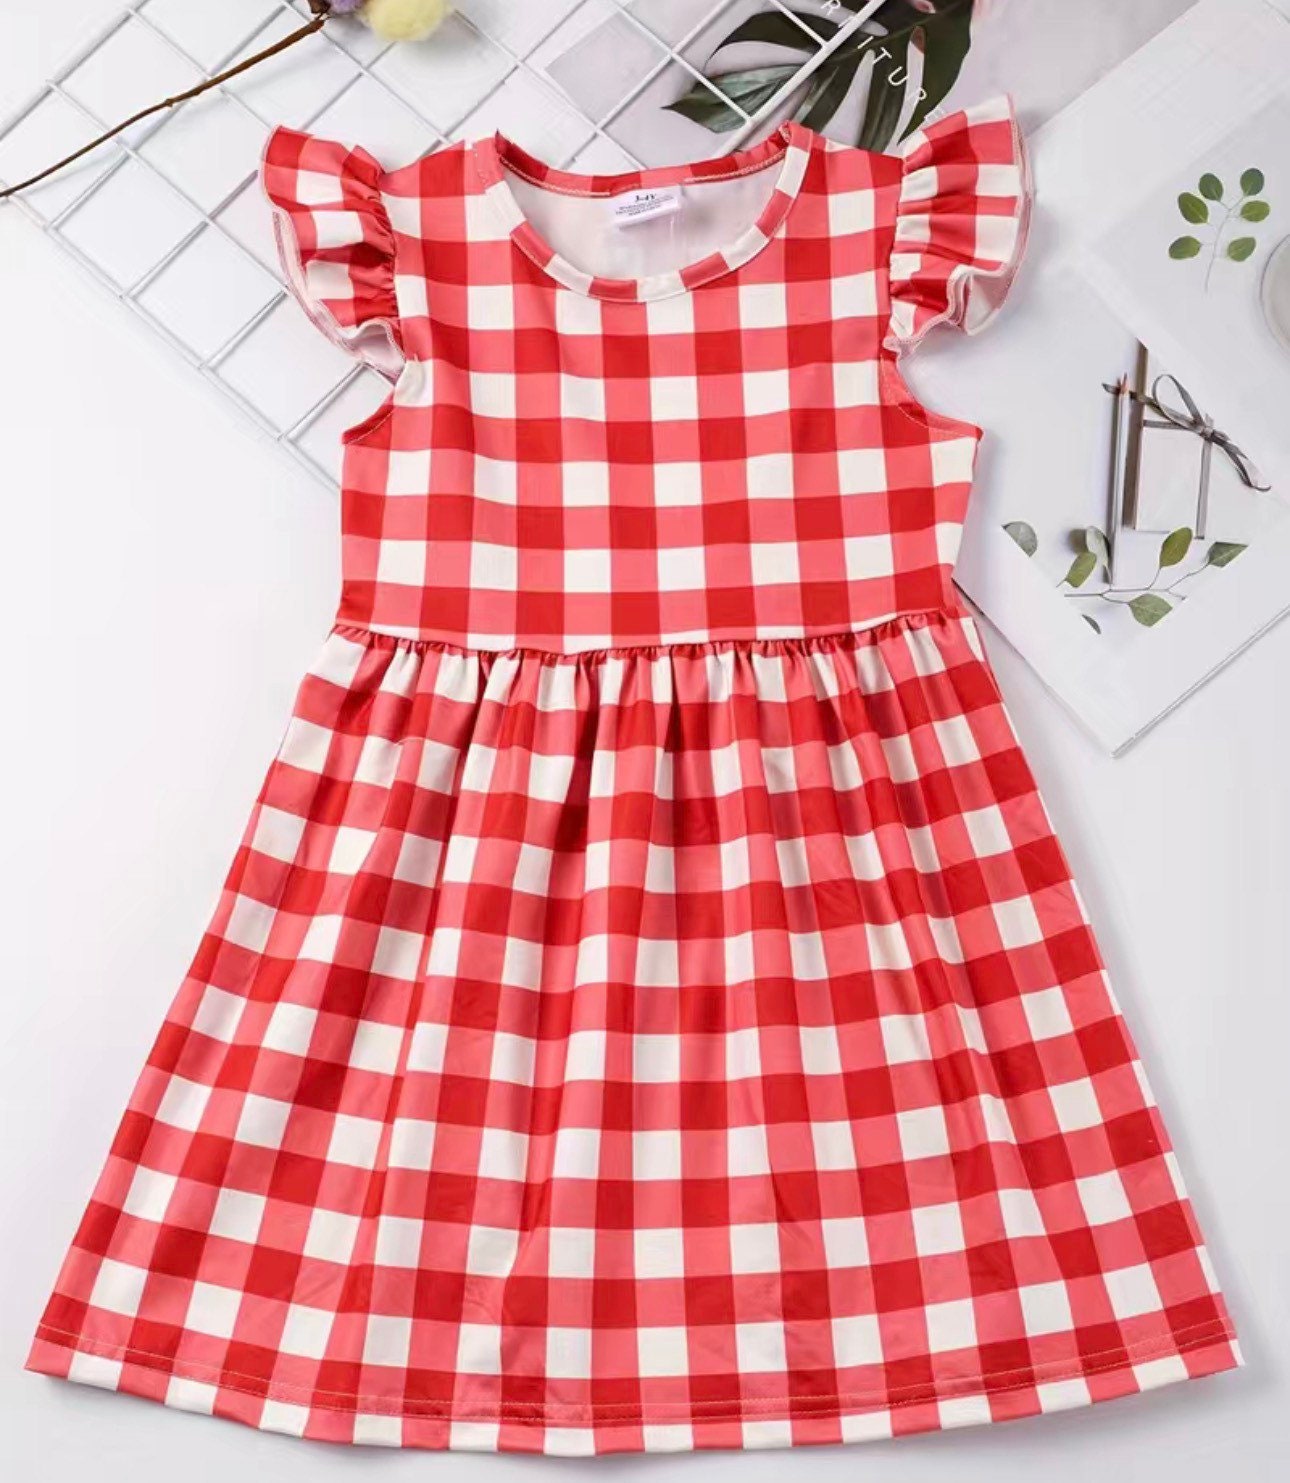 Springcmy Toddler Baby Boy Girl Summer Outfits Checkered Plaid